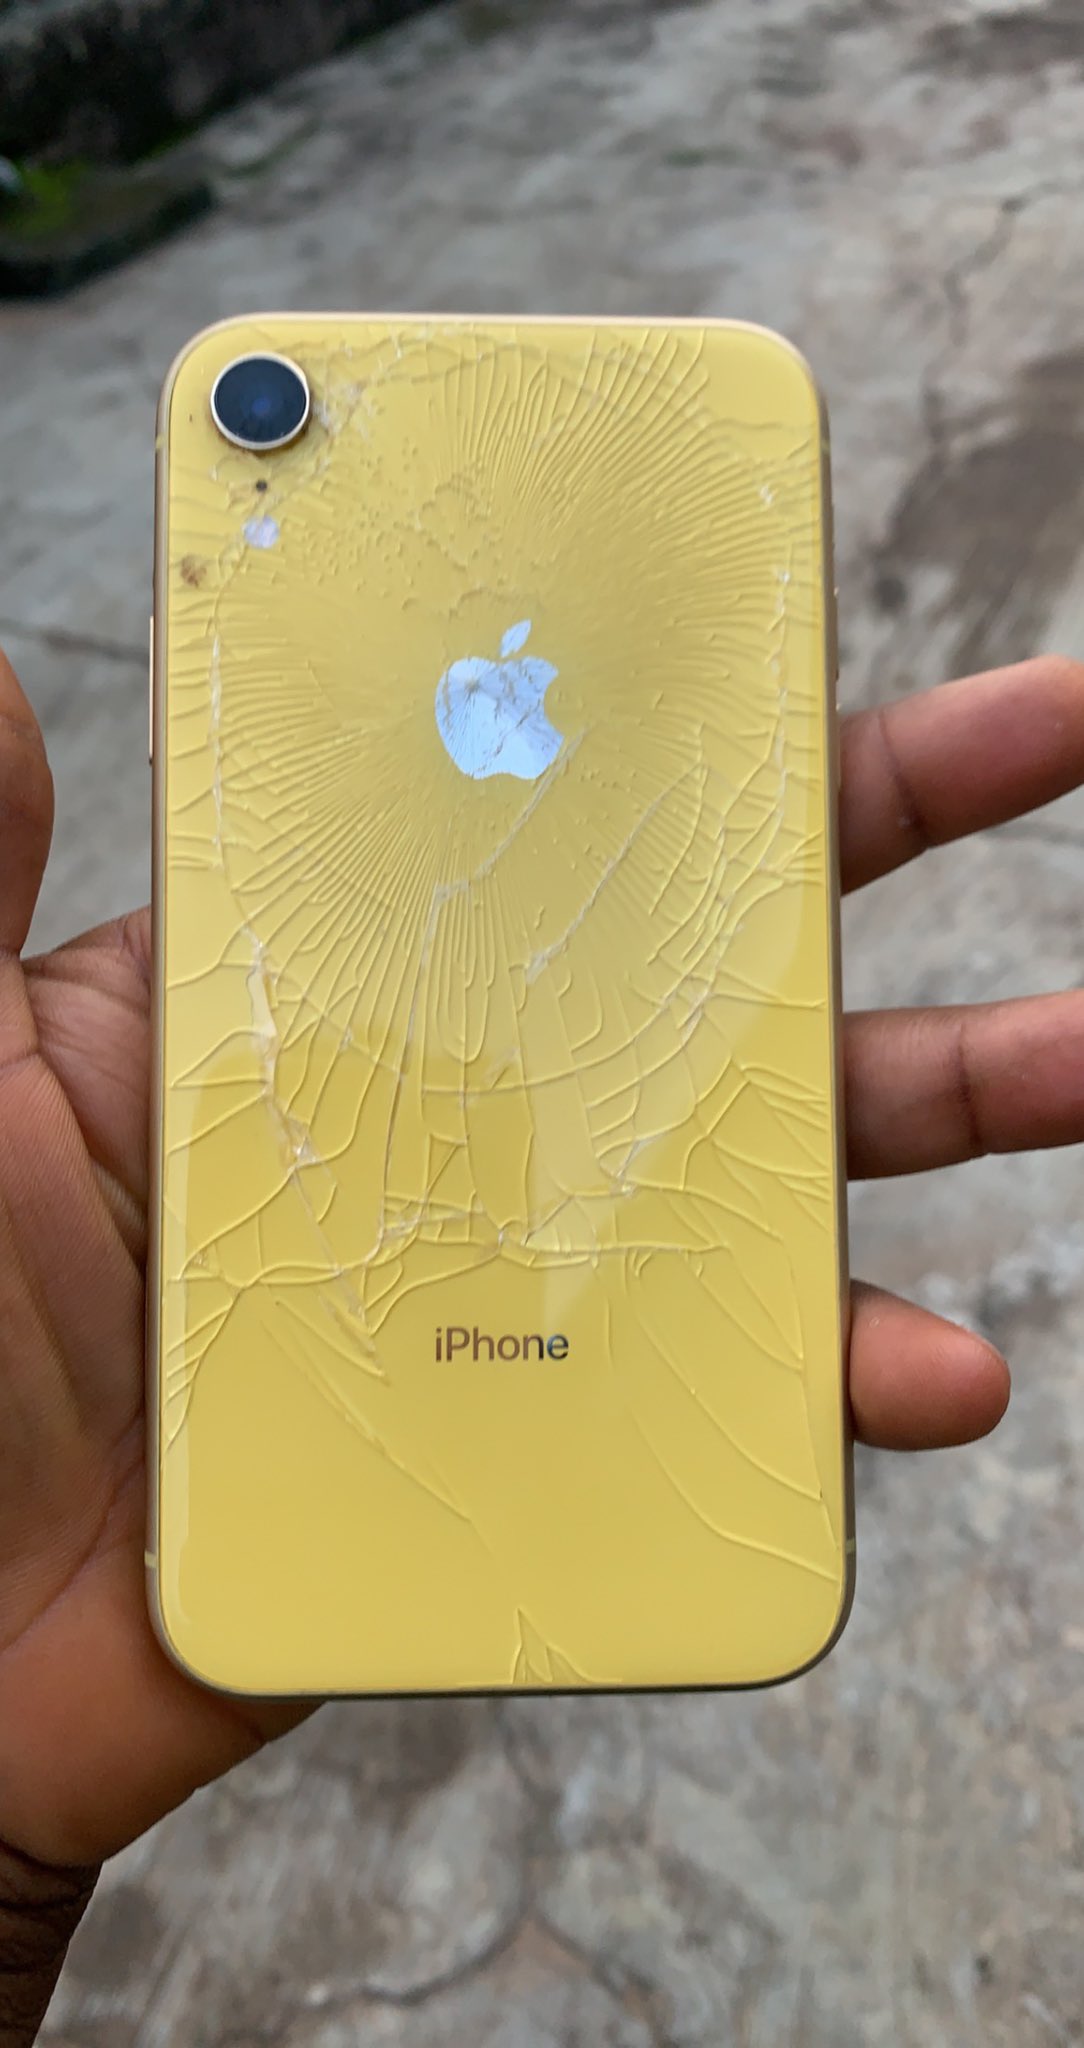 Lady jubilates after shattering her $300 iphone on man’s head for slut shaming her [photos]